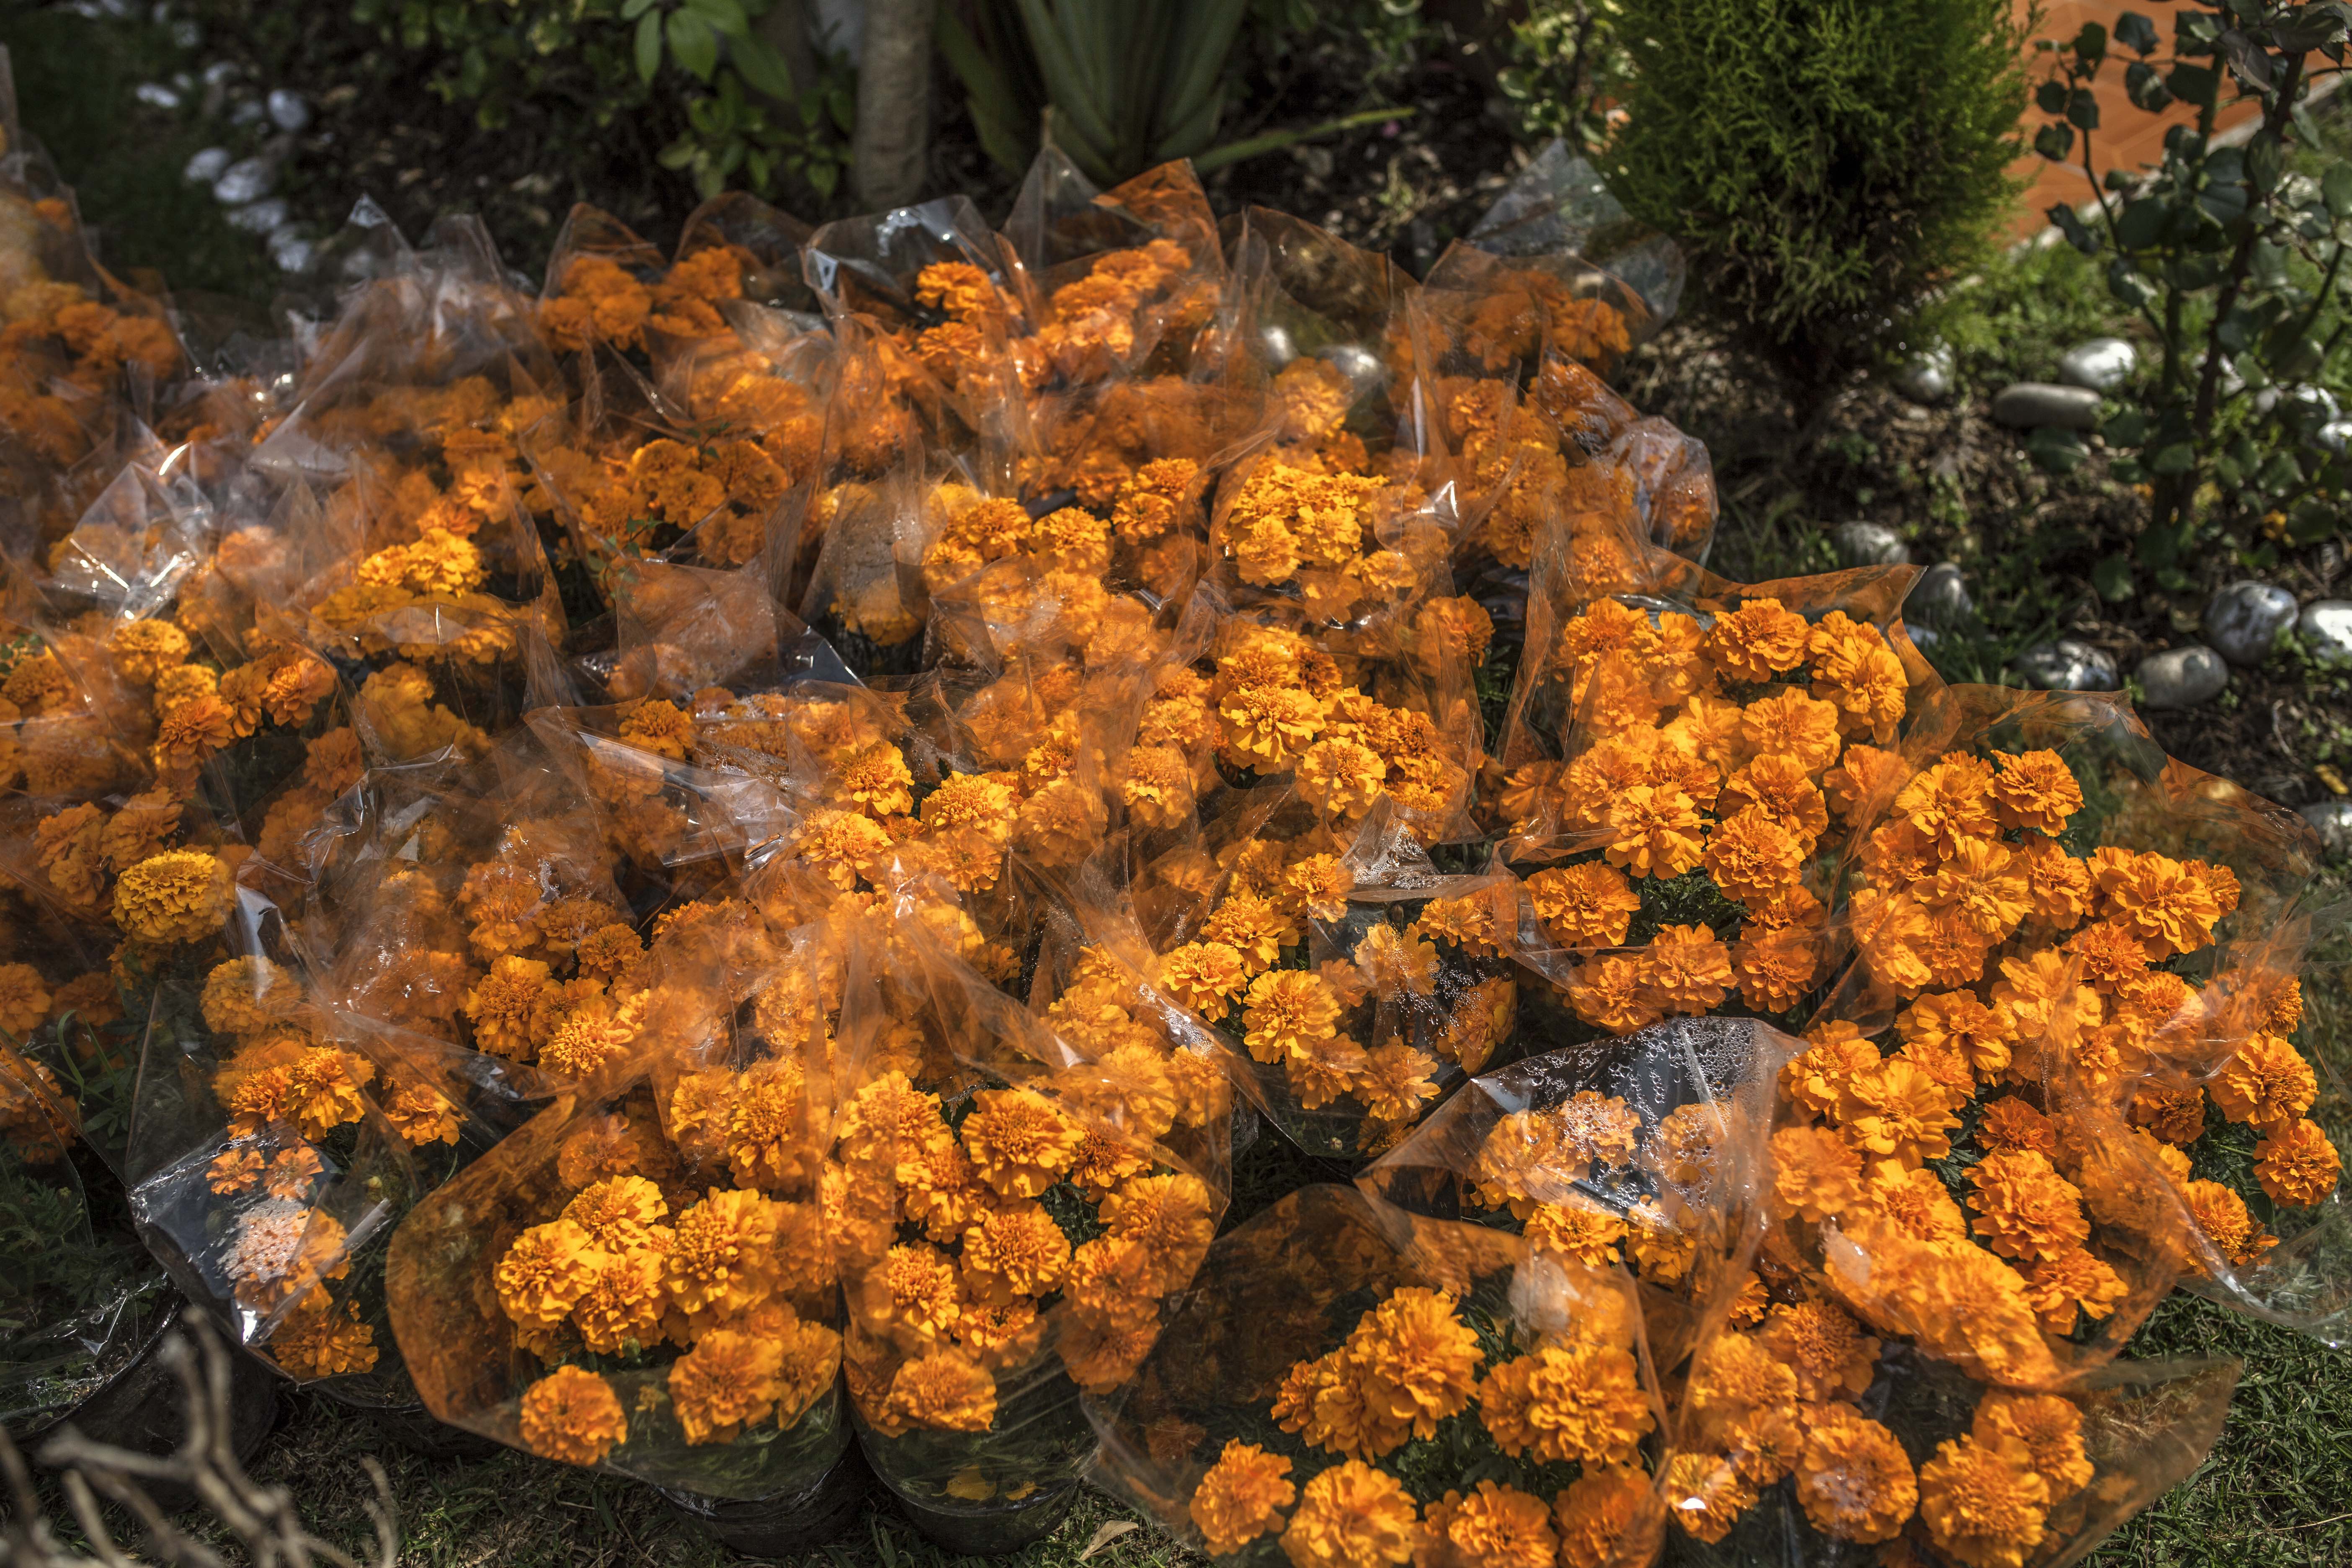 How Marigolds Became the Iconic Flower Used to Celebrate Dia de Muertos